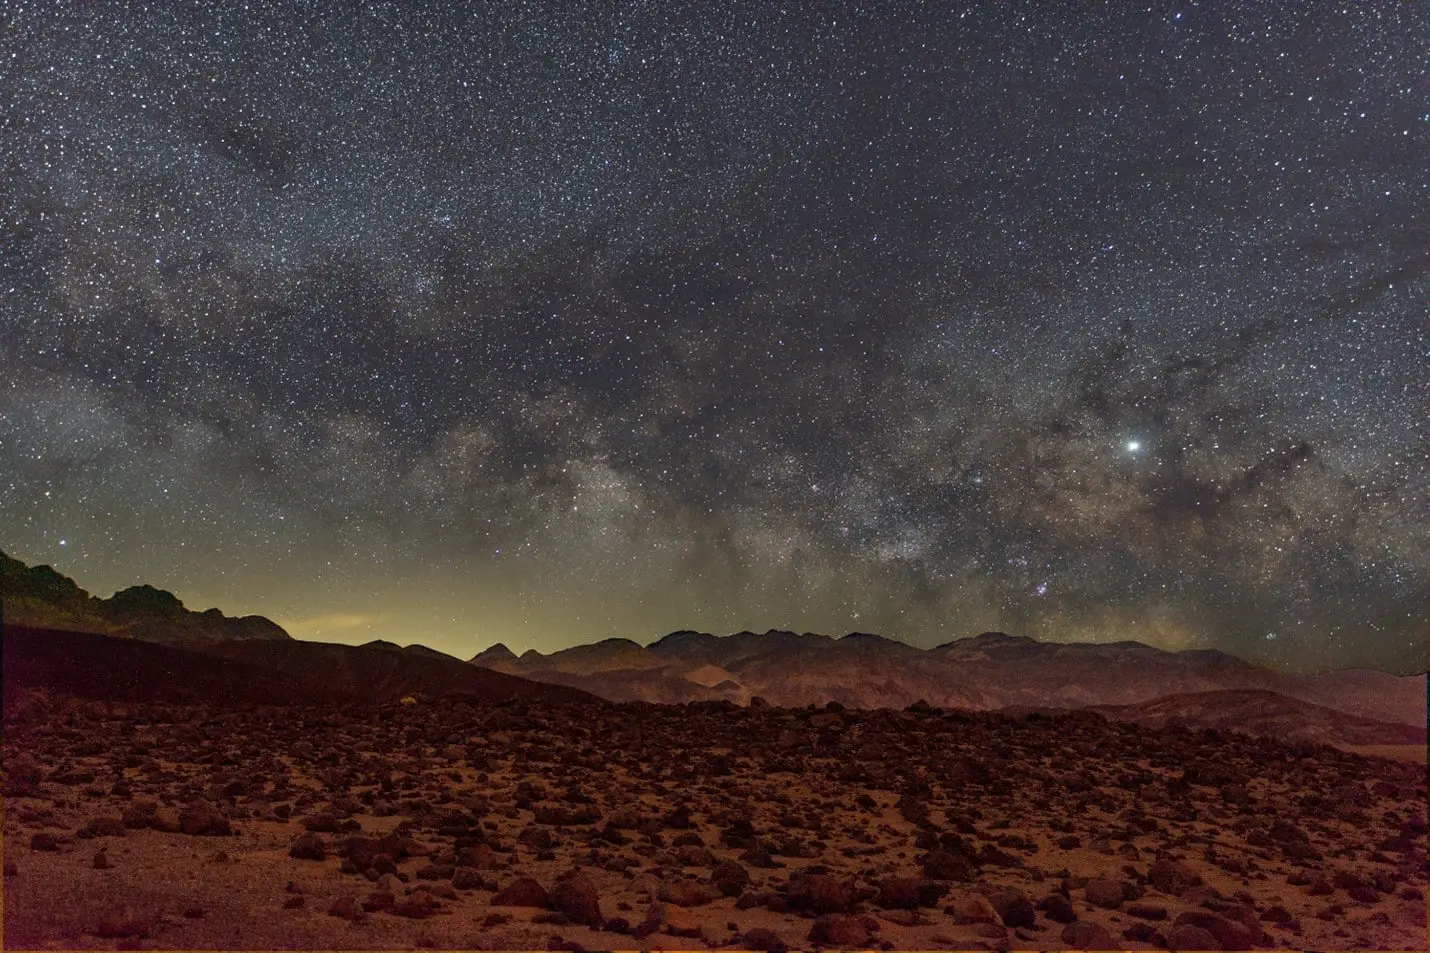 Best Places for Stargazing - Death Valley